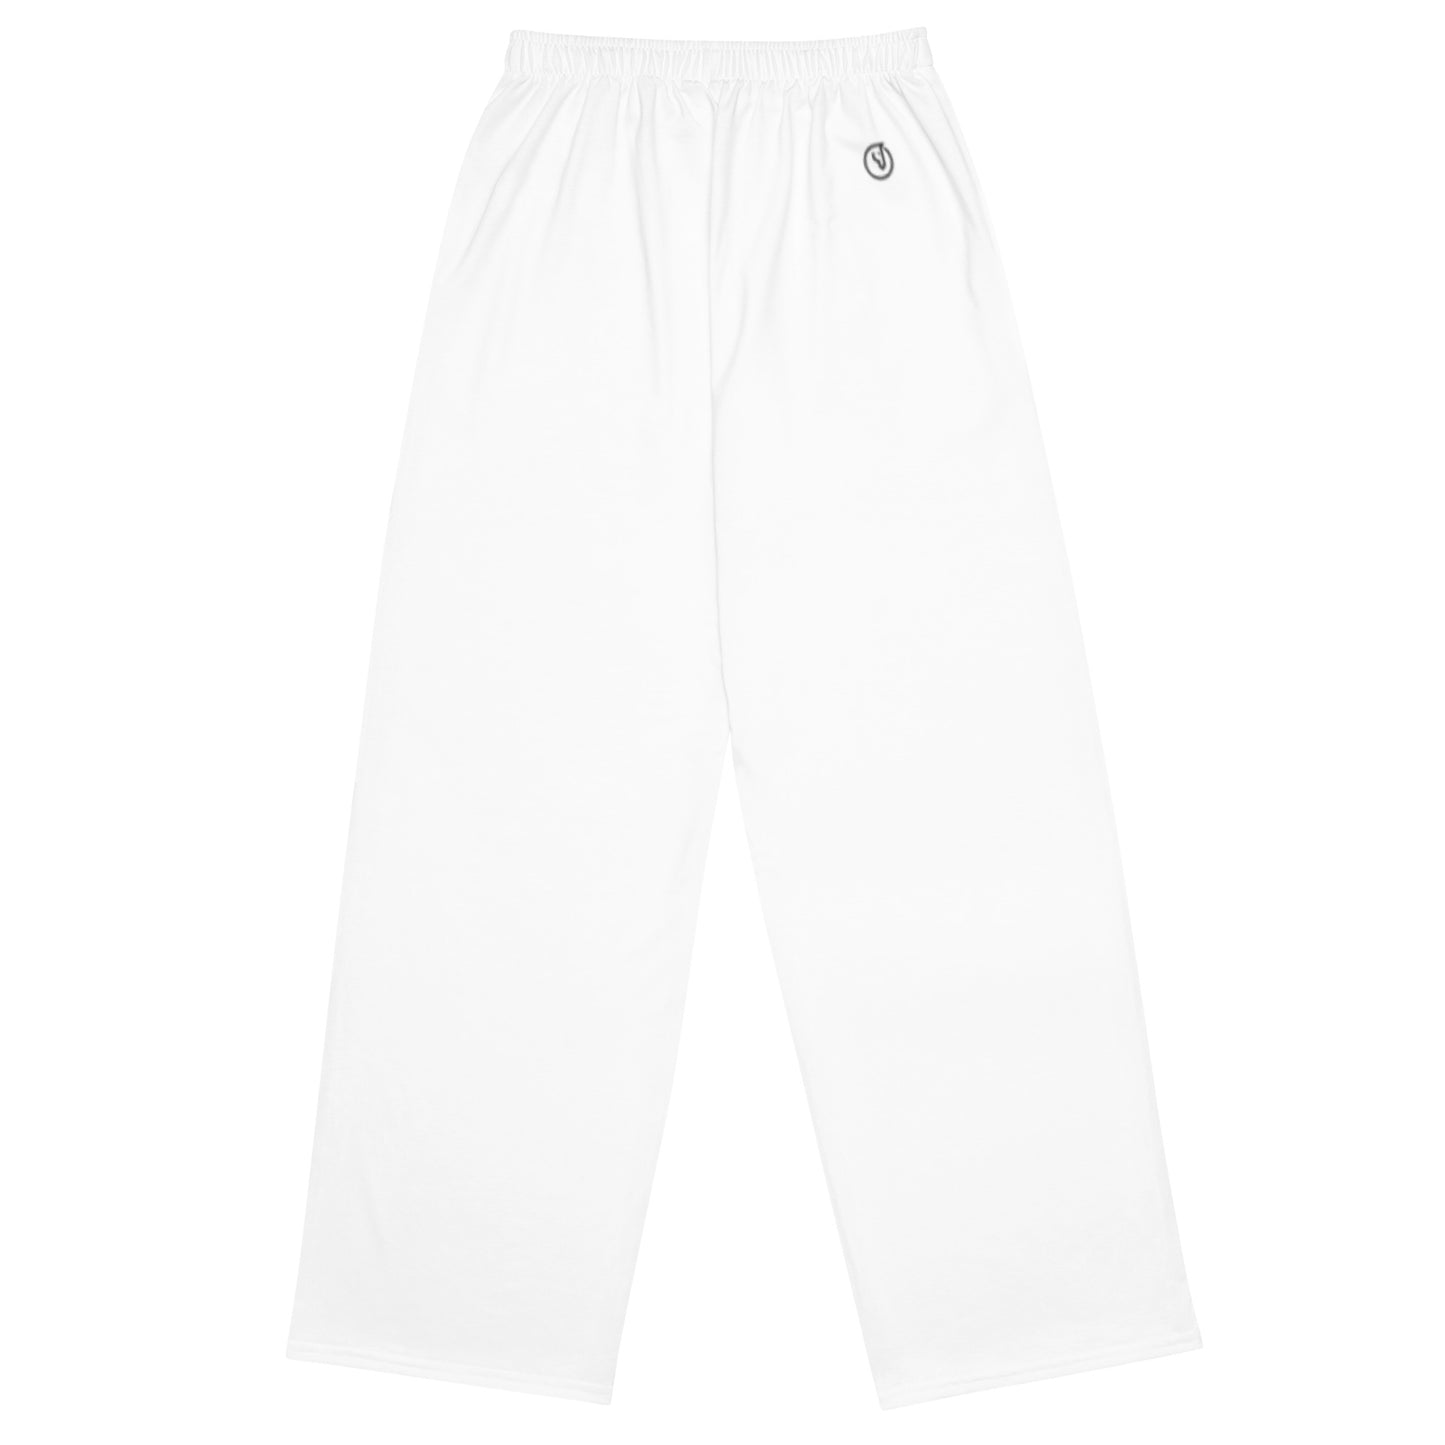 Humble Sportswear, men's color match white activewear and loungewear pants 